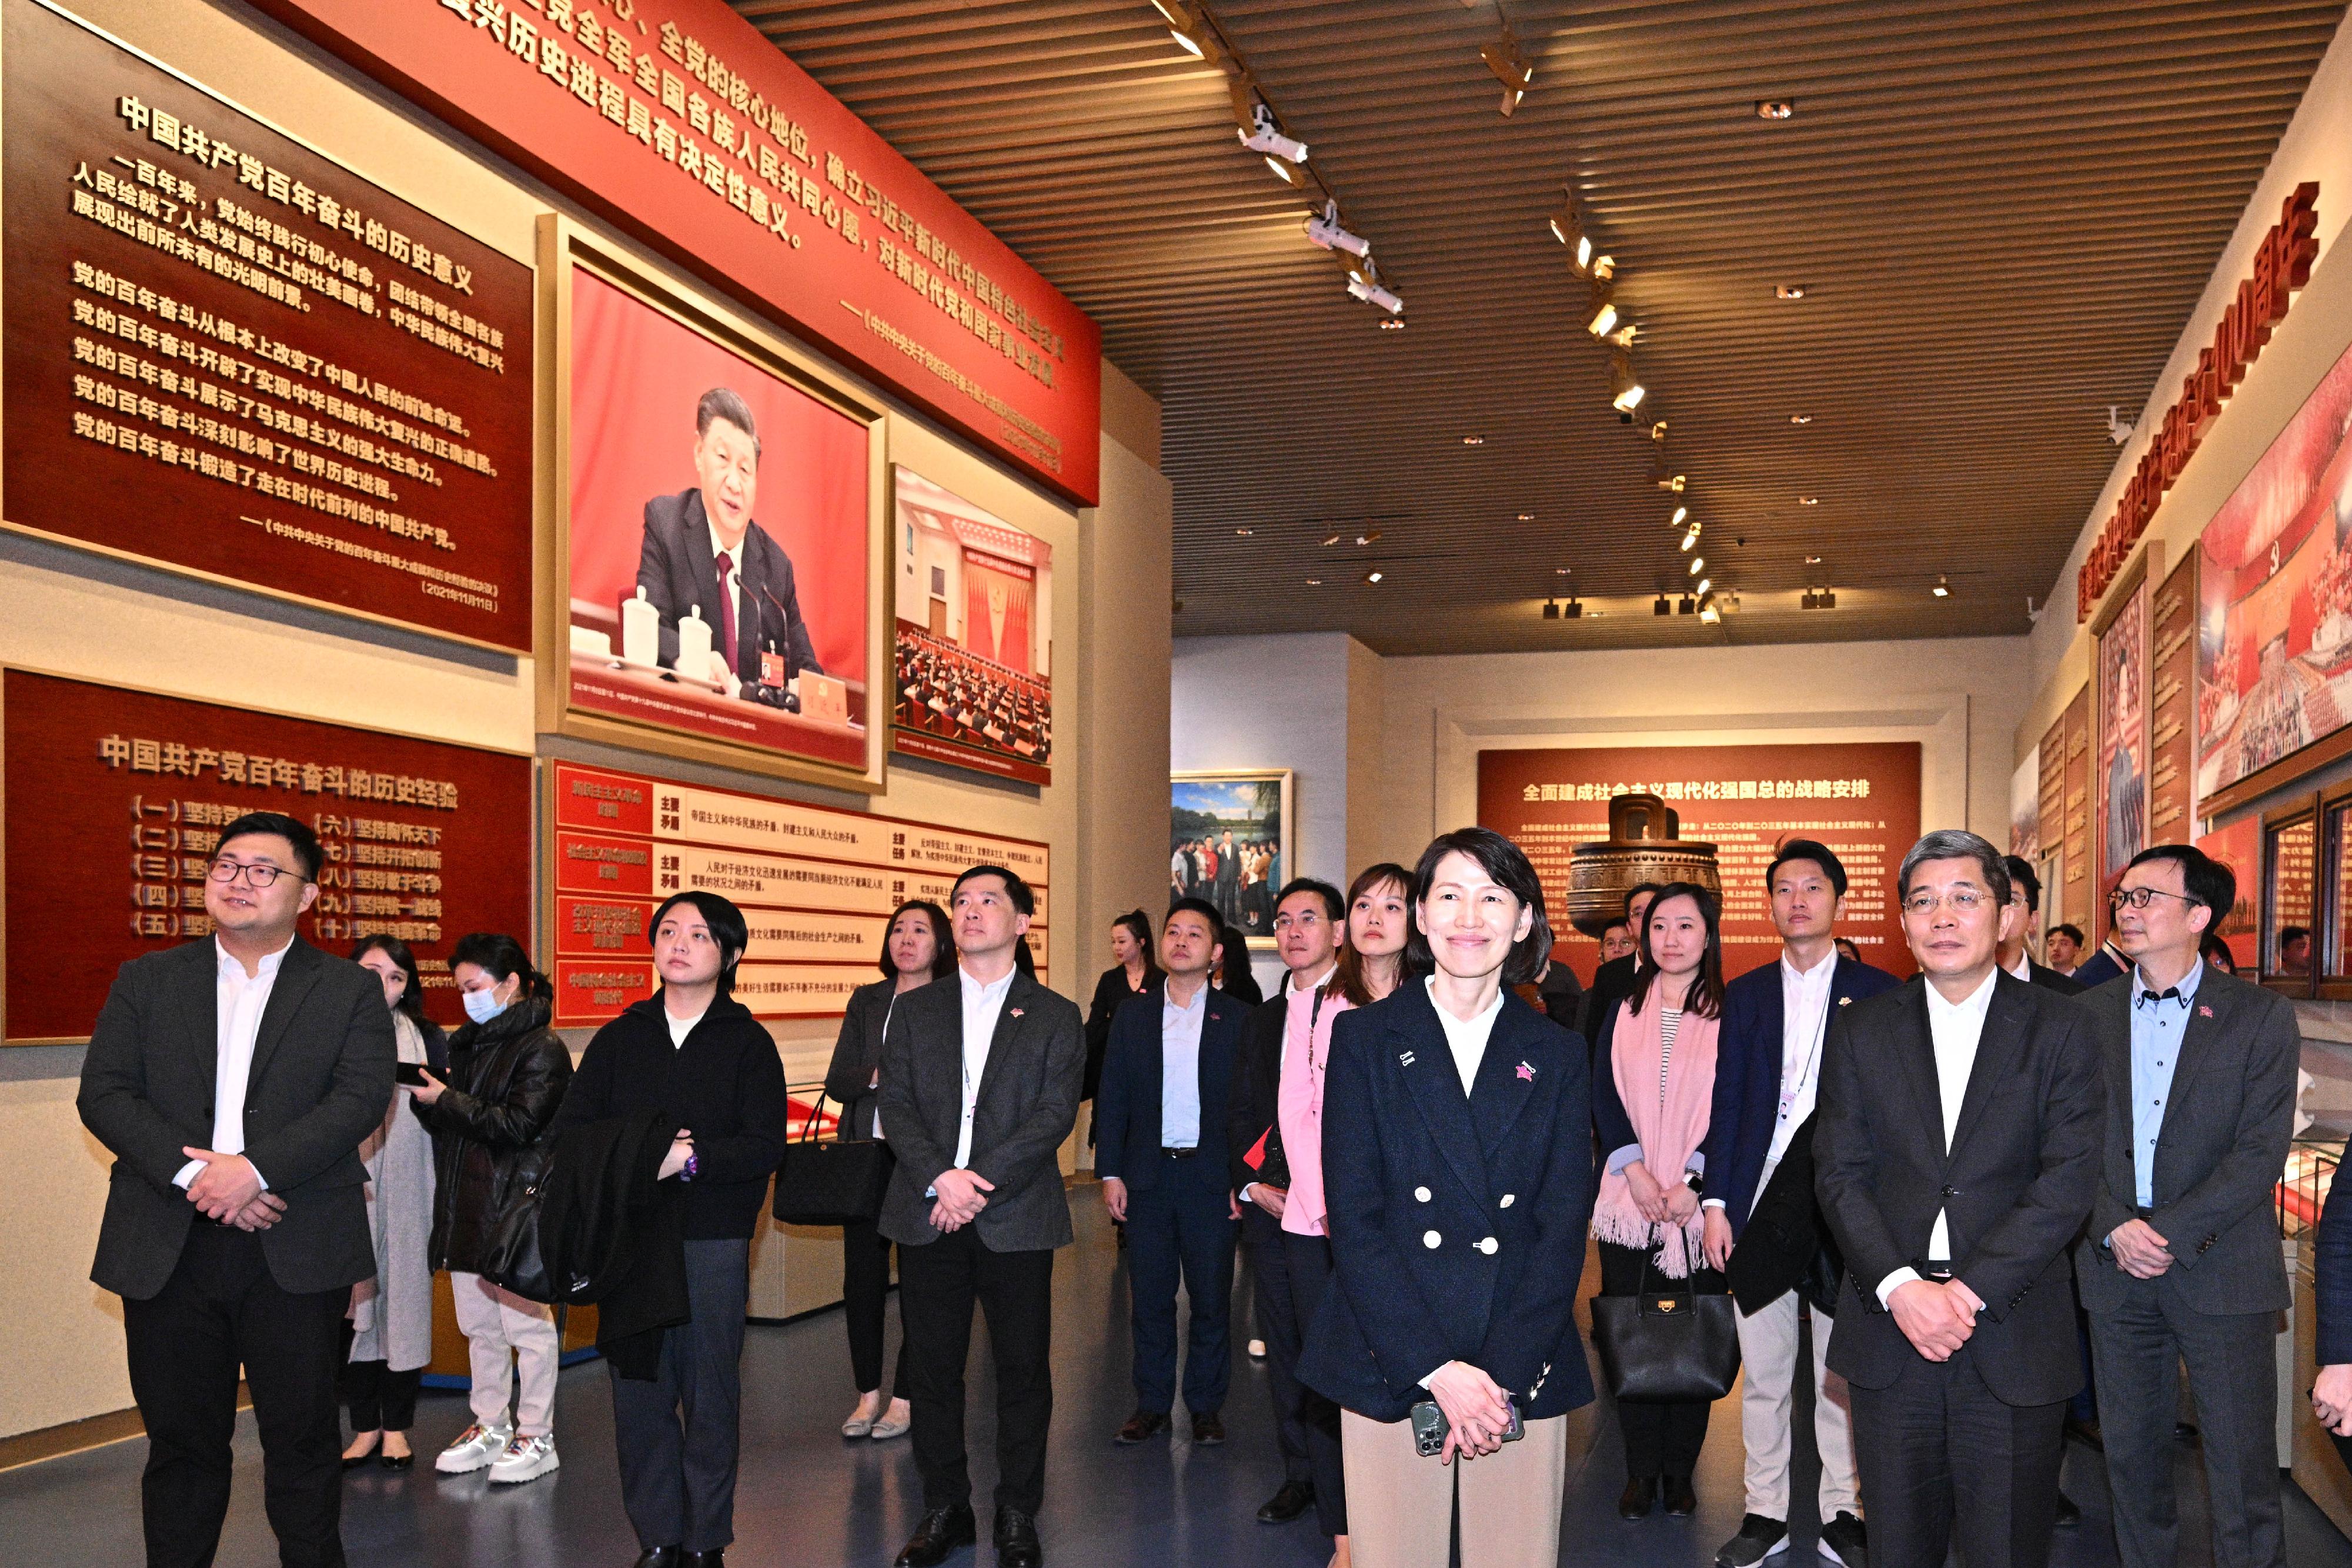 A delegation of politically appointed officials, who are in Beijing for a national studies programme and duty visit, tour the Museum of the Communist Party of China in Beijing today (November 22).

